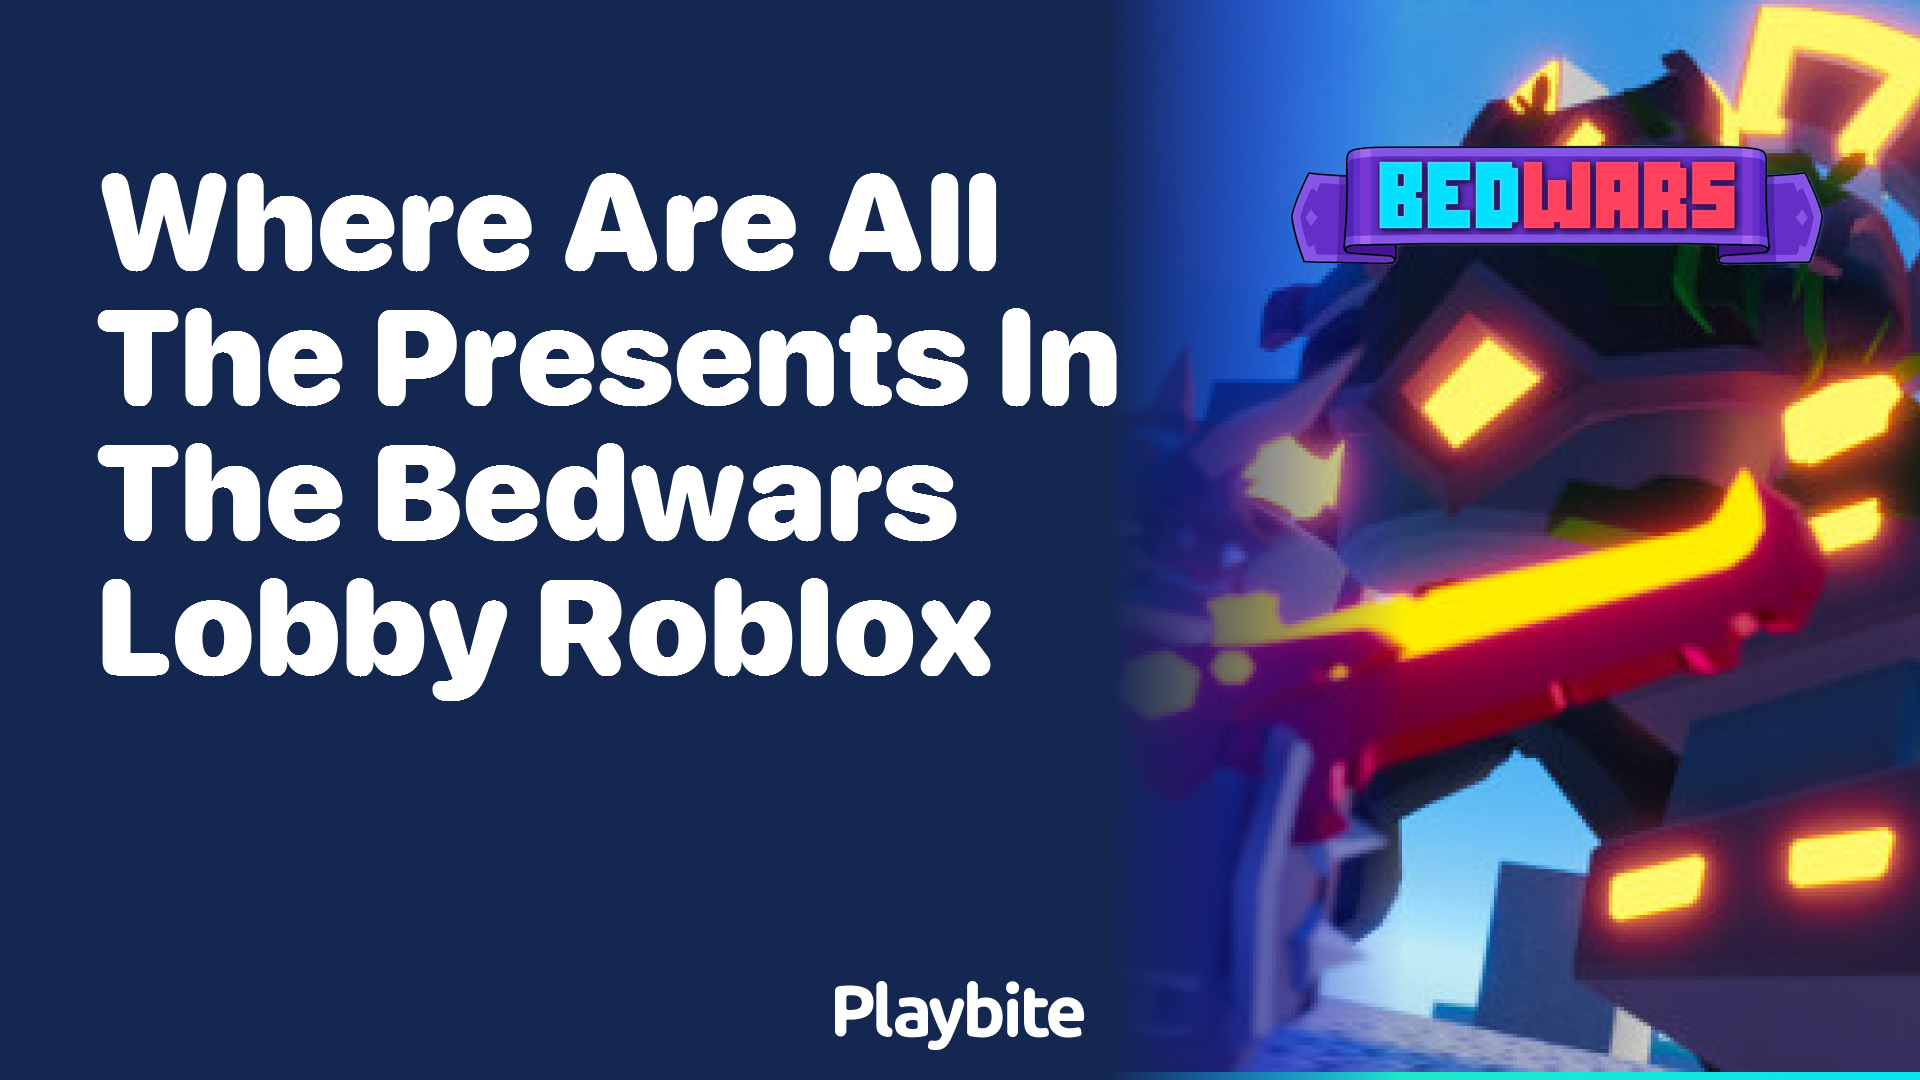 Where Are All the Presents in the Bedwars Lobby on Roblox?